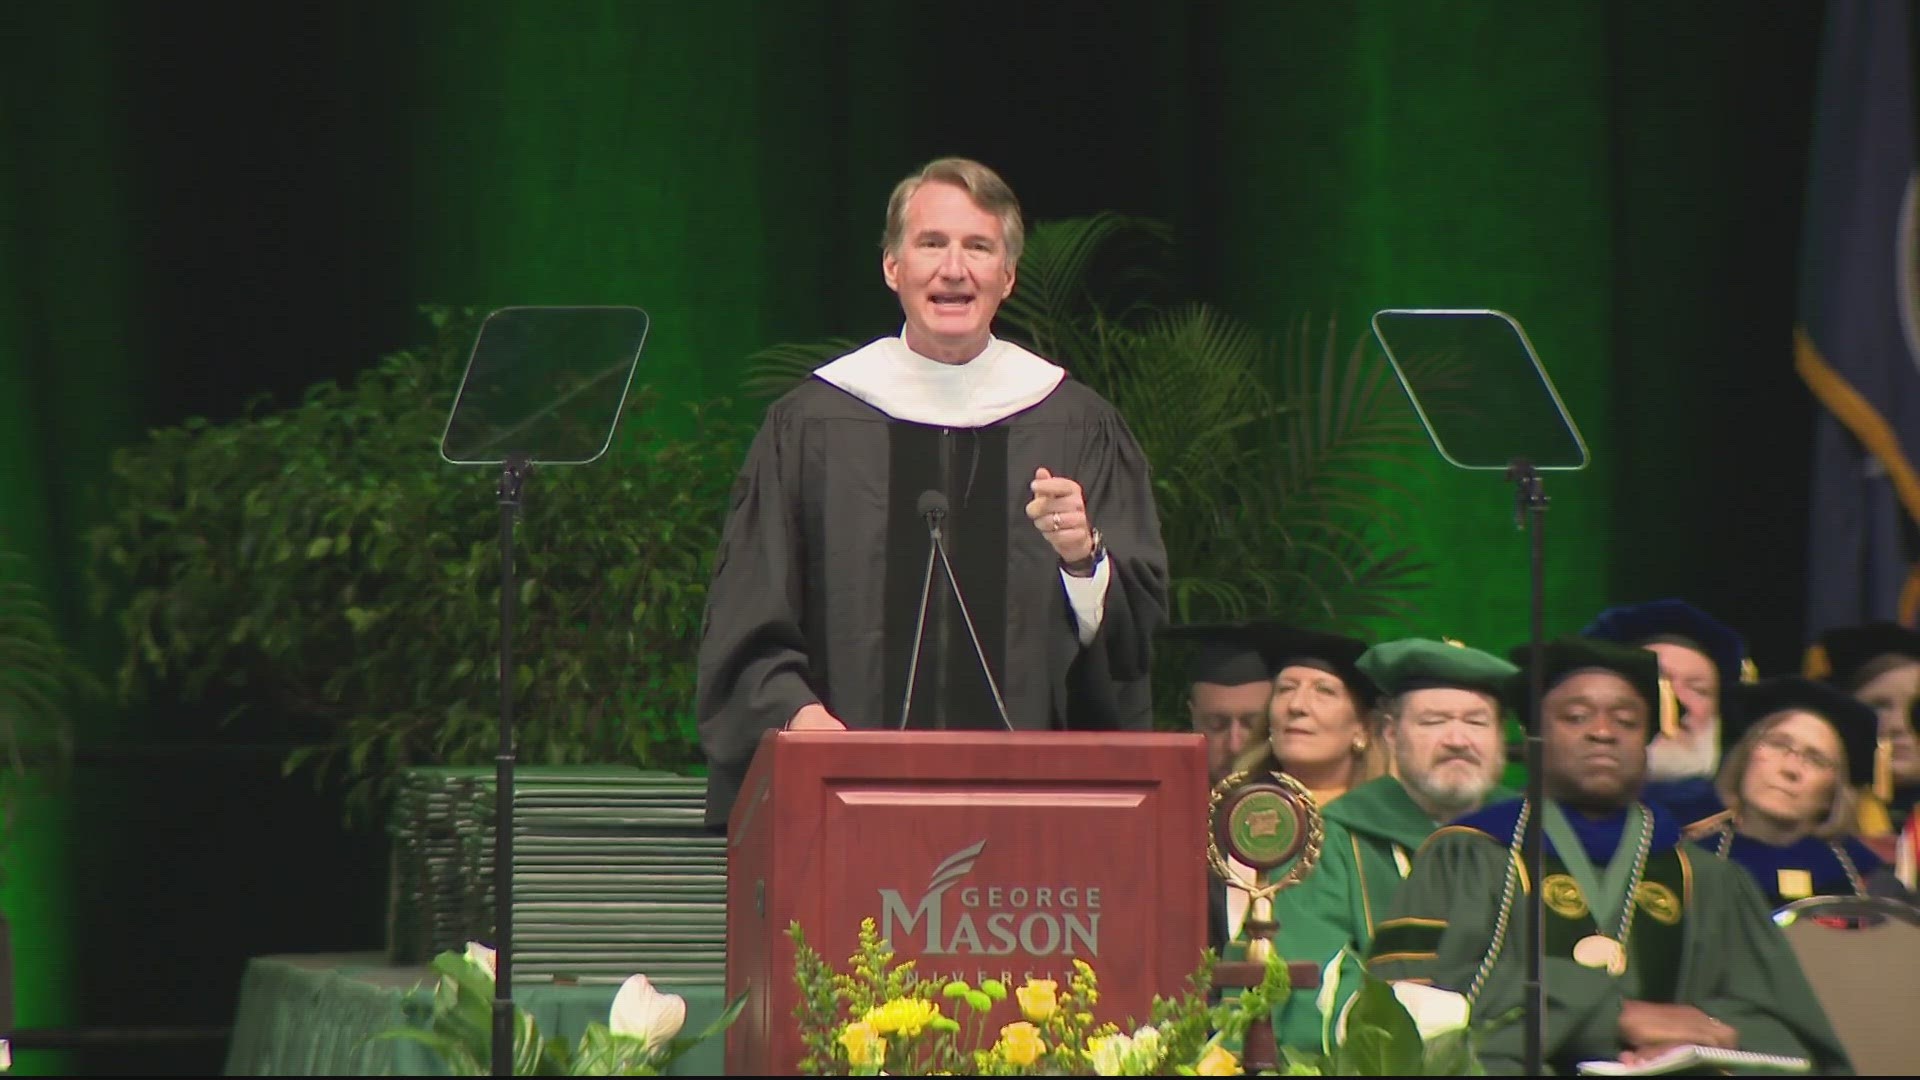 As Gov. Glenn Youngkin (R-Virginia) took the podium Thursday to deliver his commencement speech at George Mason University, some students demonstrated.